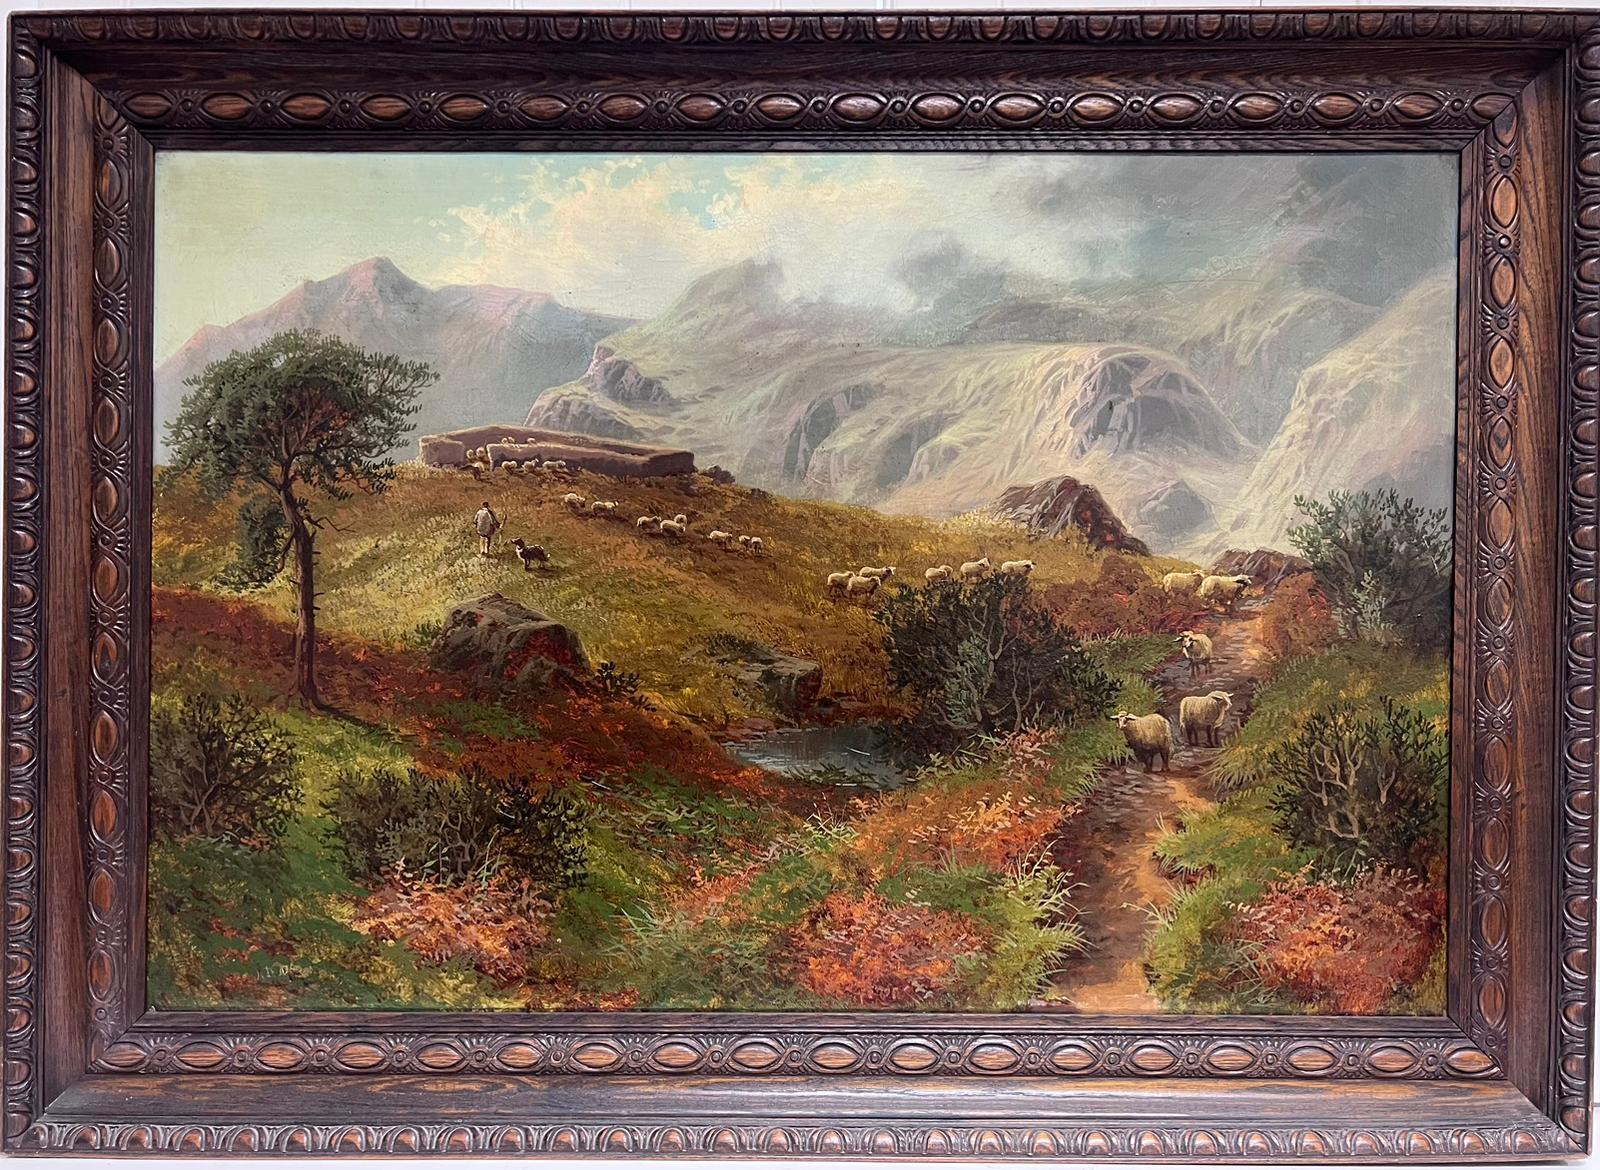 Glencoe
Scottish School, late 19th century
indistinctly signed lower corner
signed oil painting on canvas, framed
framed: 30.5 x 42 inches
canvas: 24 x 36 inches 
provenance: private collection, UK
condition: very good and sound condition
